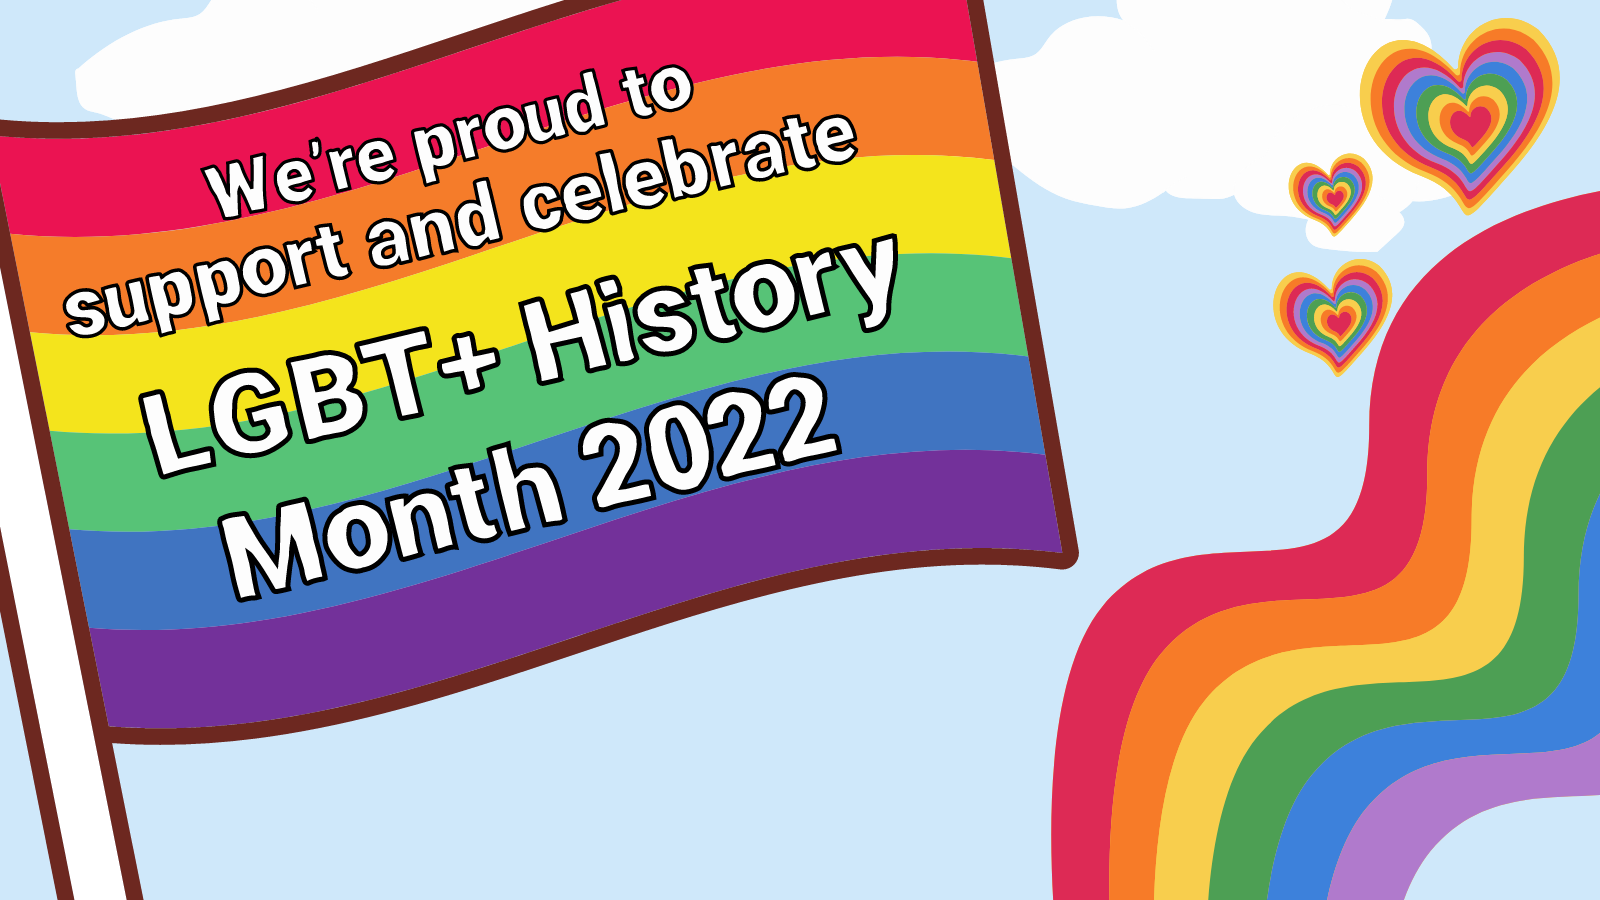 We're proud to support and celebrate LGBT+ History Month 2022